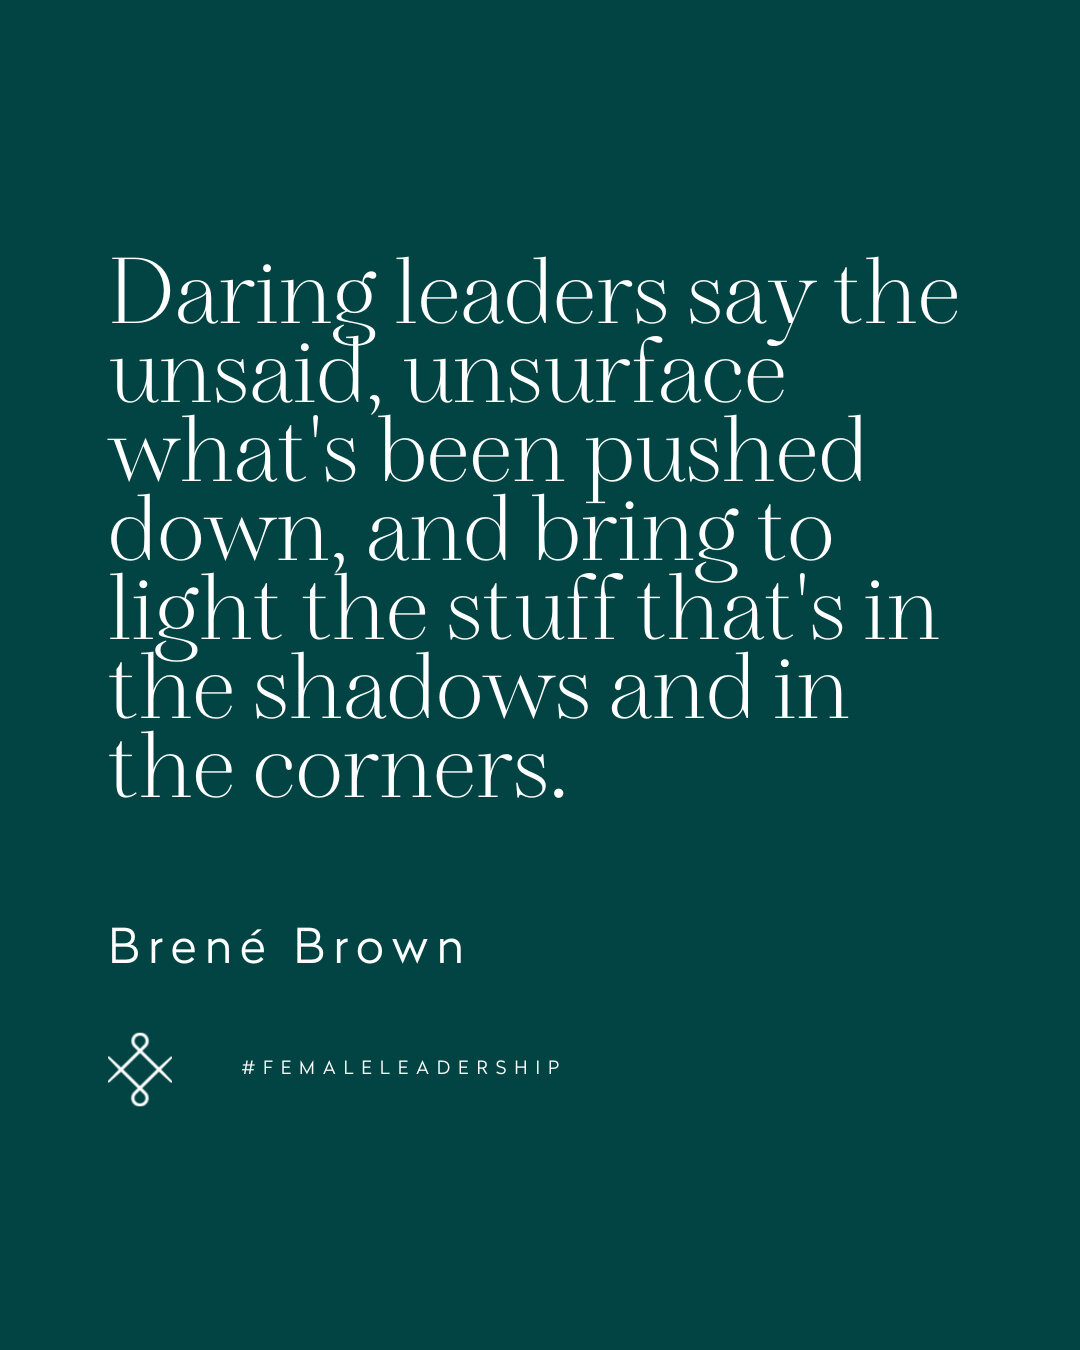 Bren&eacute; Brown&rsquo;s &lsquo;Dare to Lead&rsquo; has been one of my favourite reads and one that I&rsquo;d highly recommend if you&rsquo;re looking to strengthen your leadership skills.​​​​​​​​​
If you&rsquo;ve already read this one or would lik